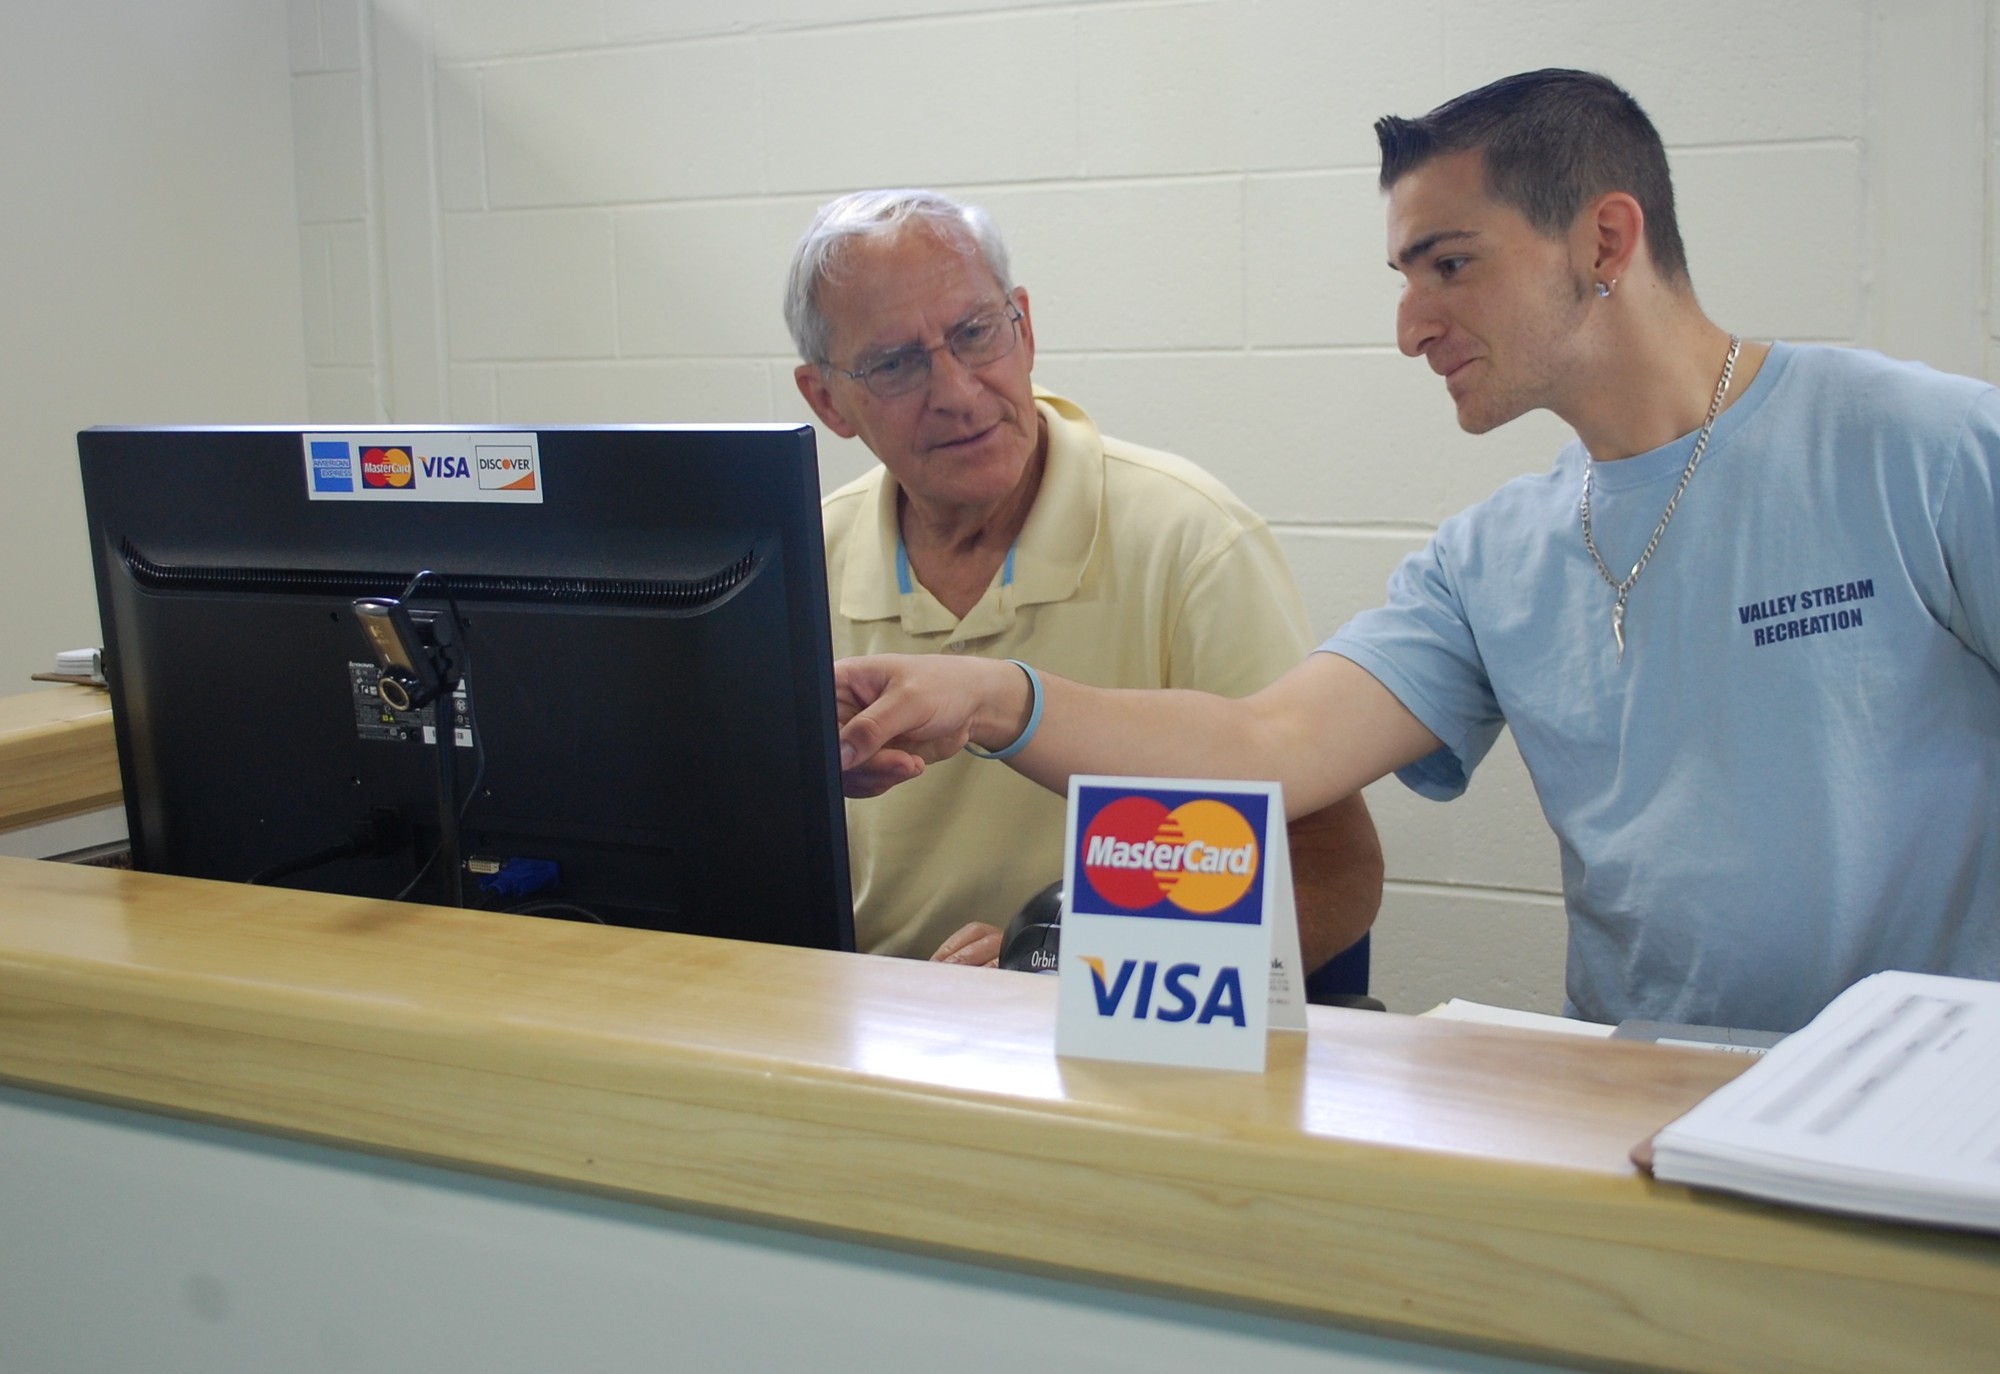 Recreation Director Tom Roberts and attendant Vincent DePergola work at the new recreation counter in the pool complex.